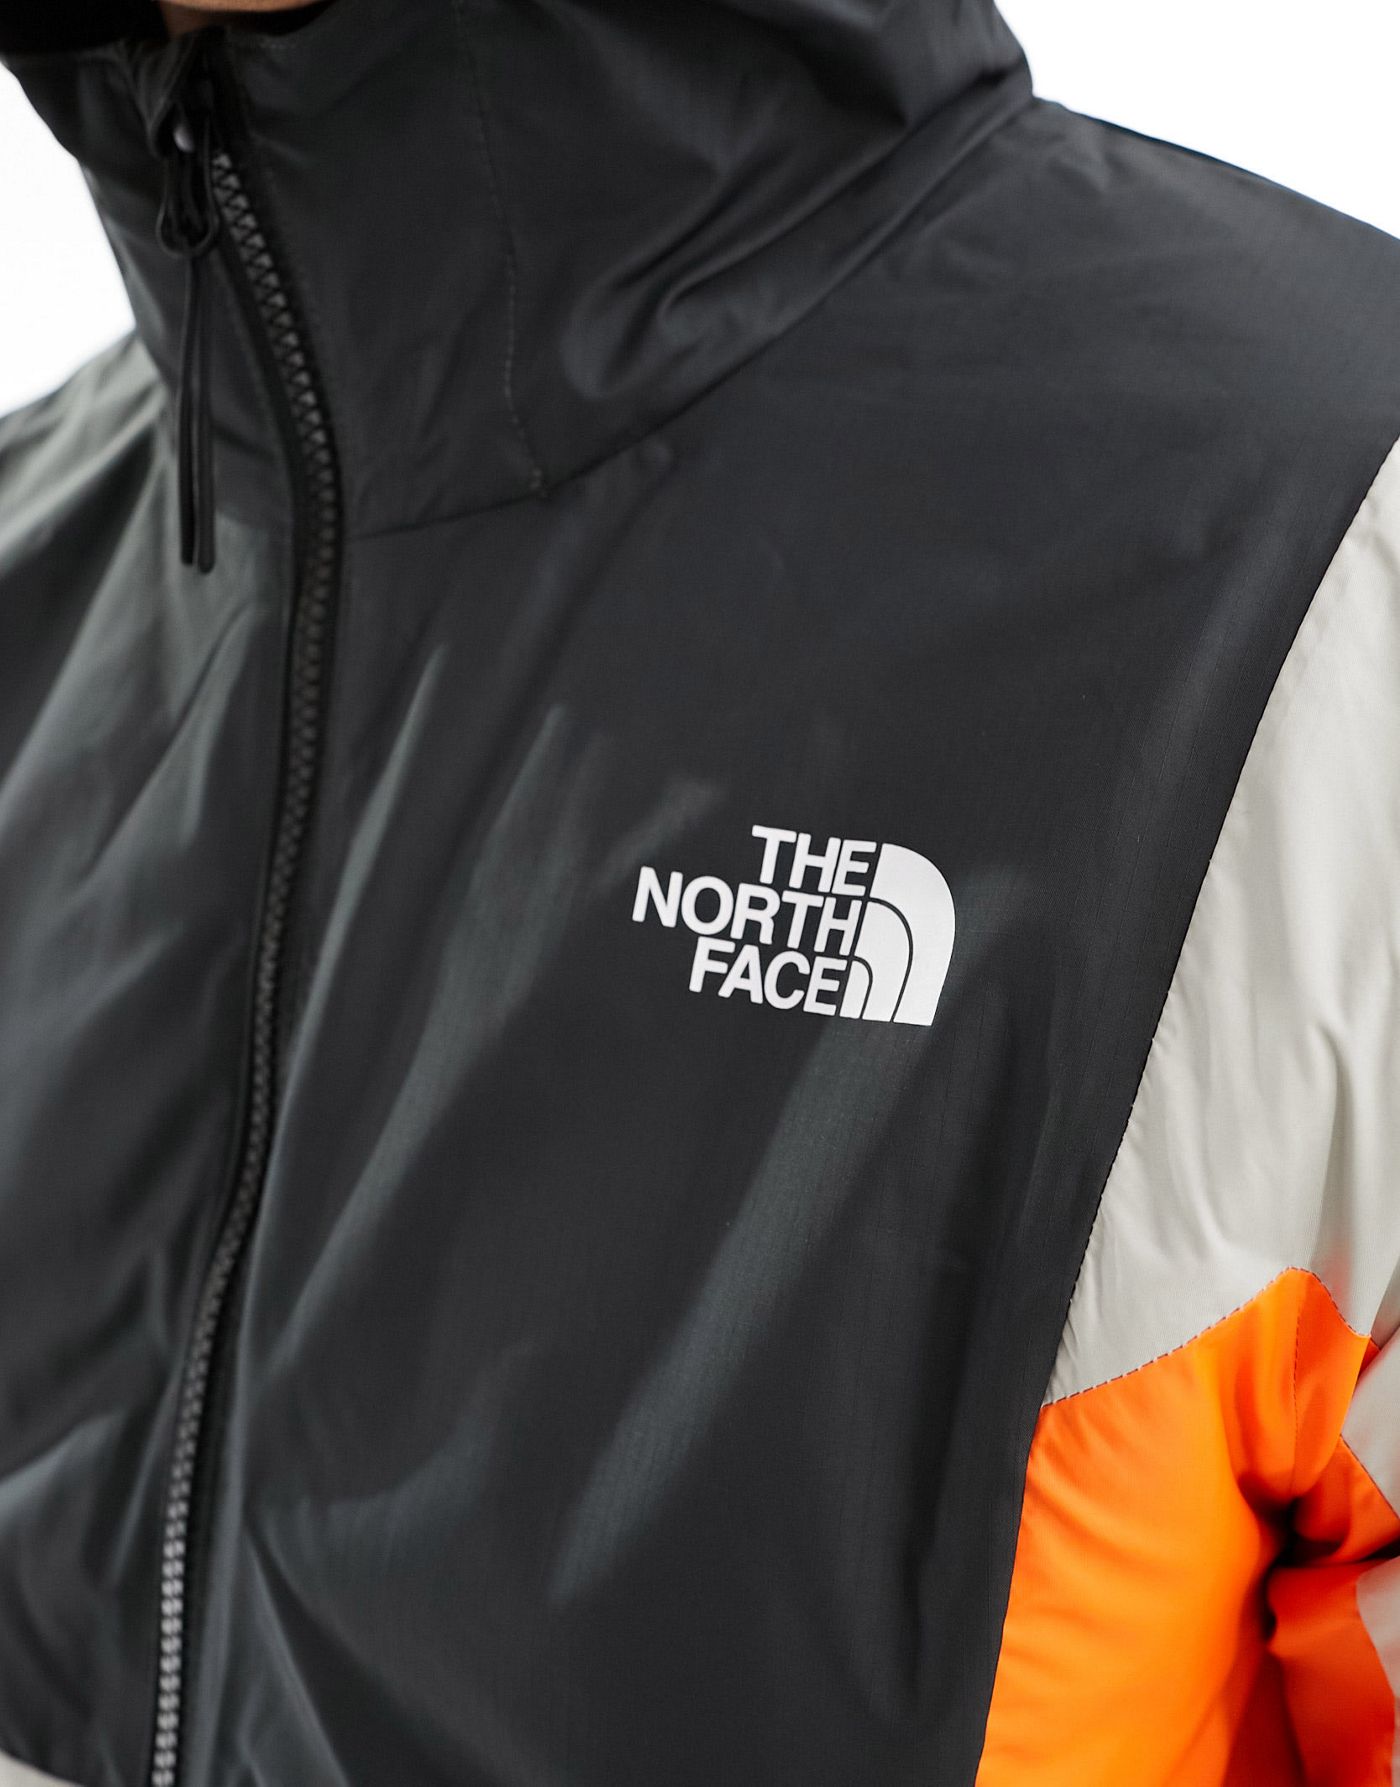 The North Face Training Mountain Athletic zip up hooded wind jacket in grey and orange